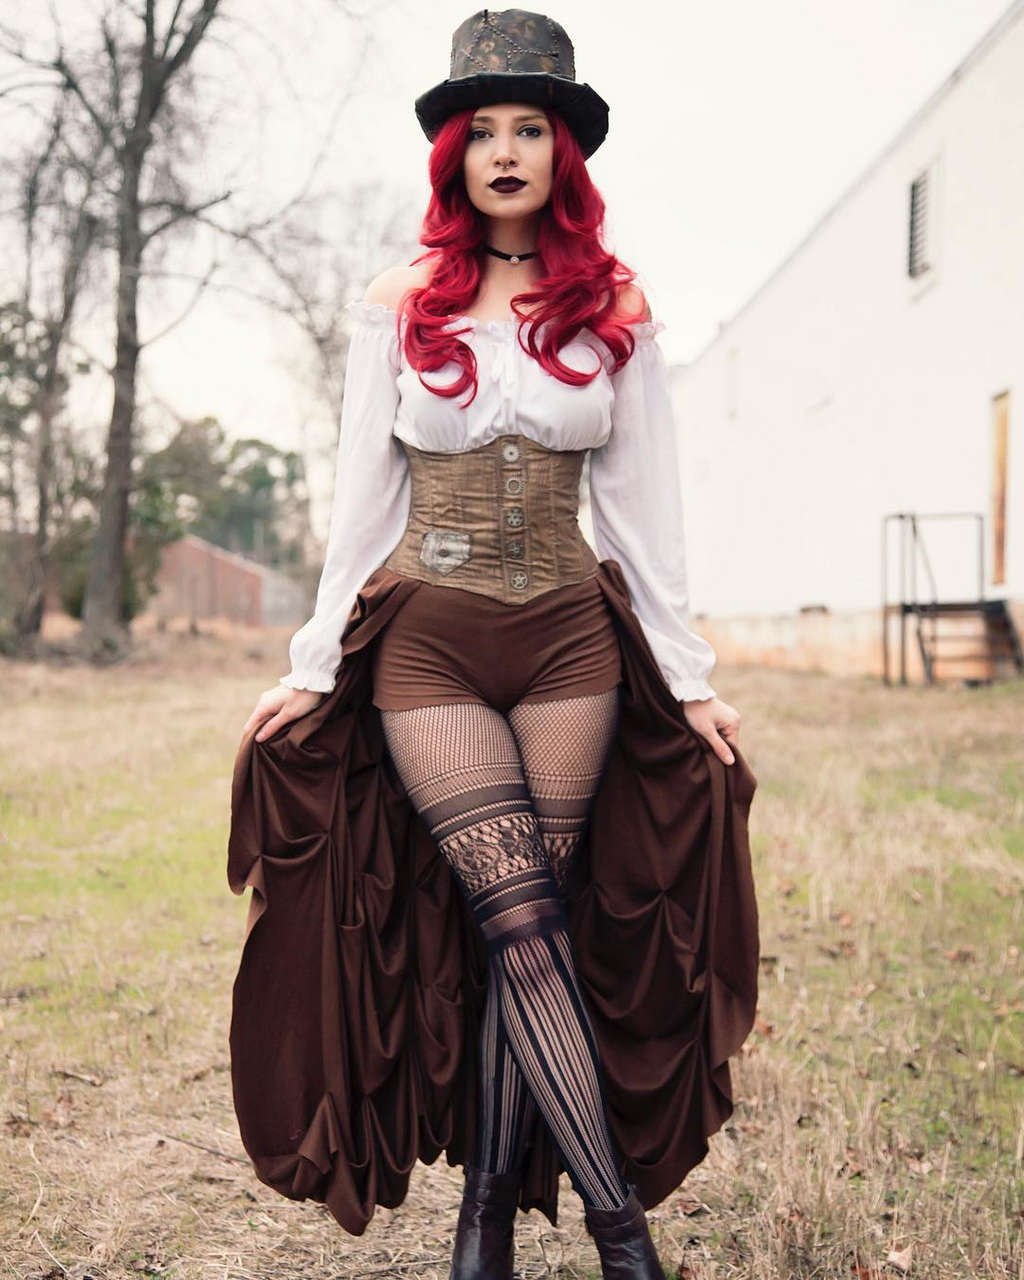 Cosplay Artist Shelly Also Known As 2sh